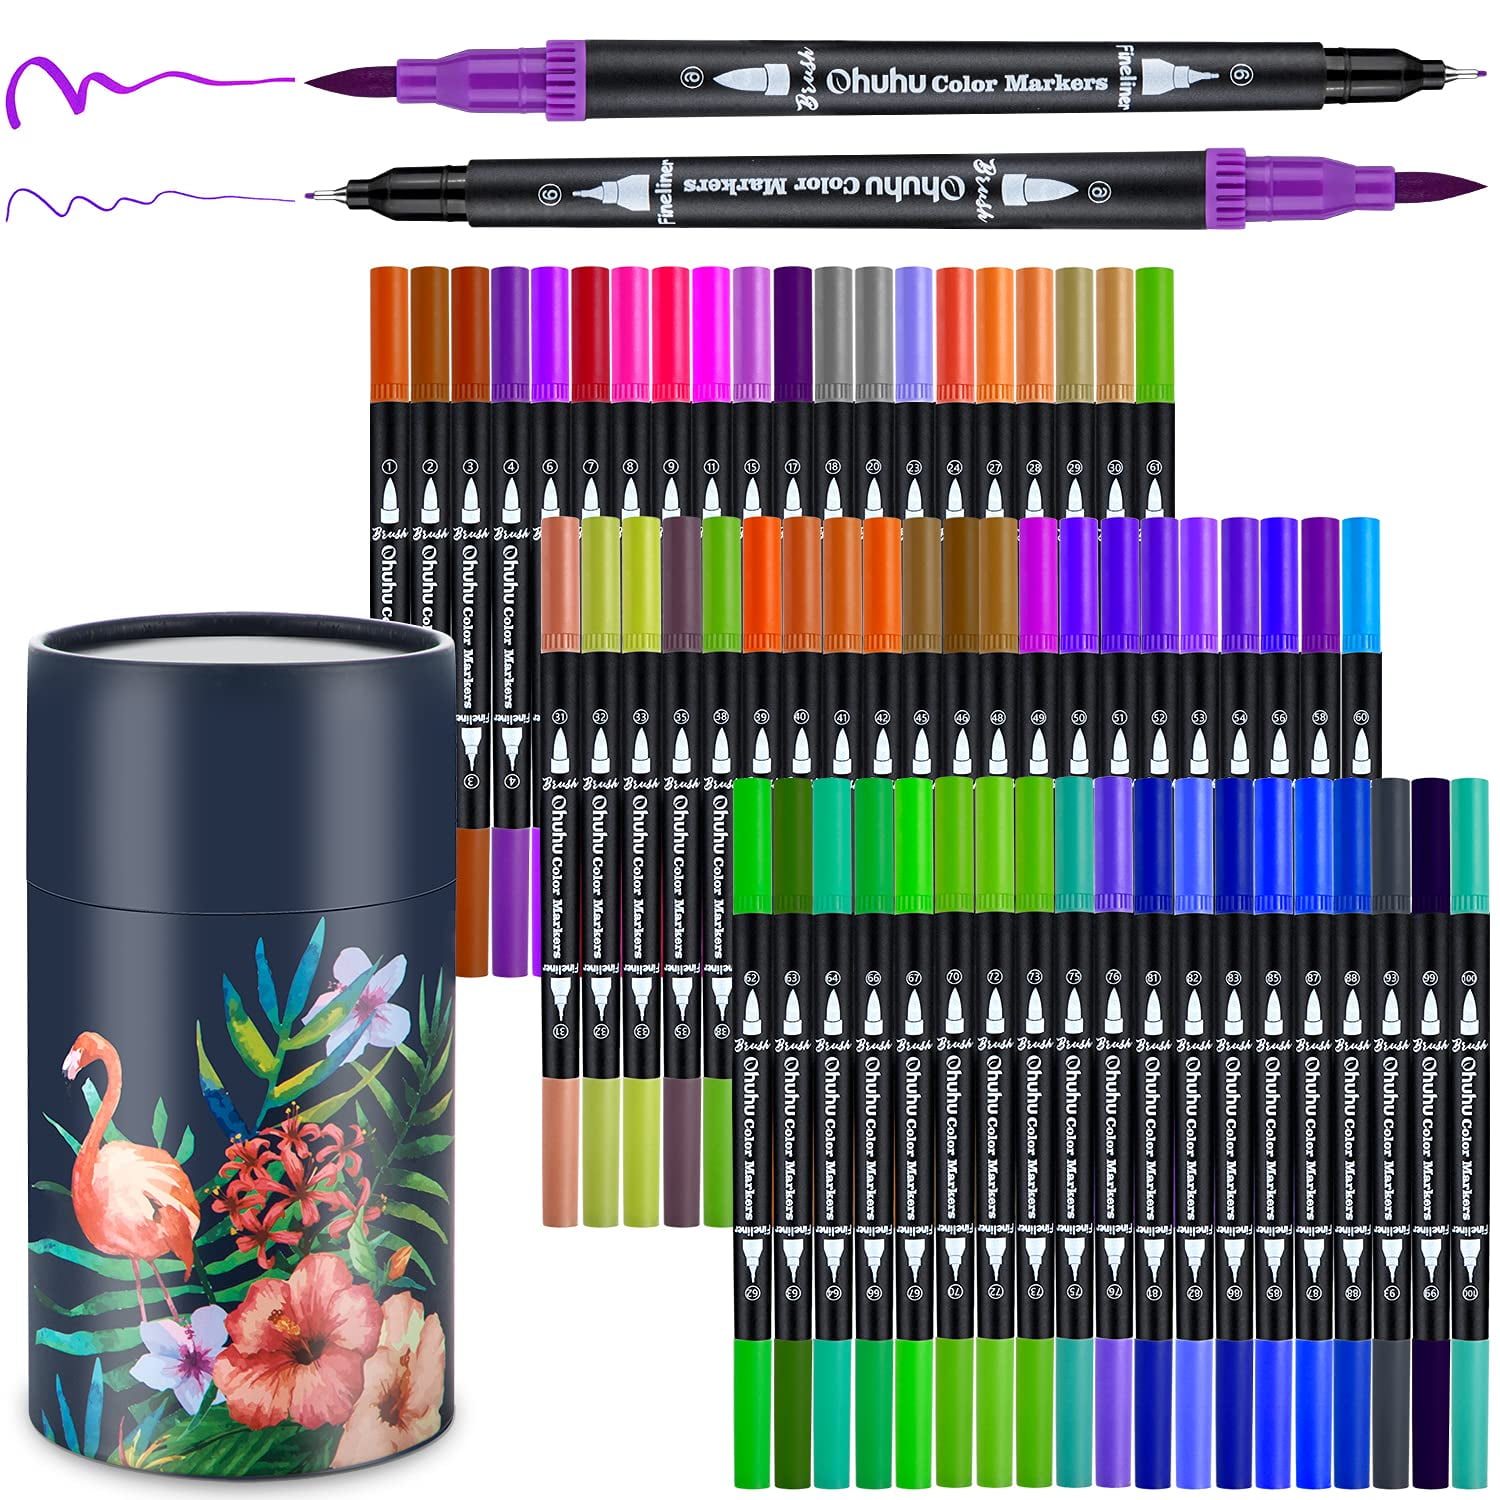 Markers for Adult Coloring, Ohuhu 60 Colors Art Marker Dual Brush Pens,  Fine & Brush Tip, Water Based Calligraphy Drawing Sketching Coloring Bullet